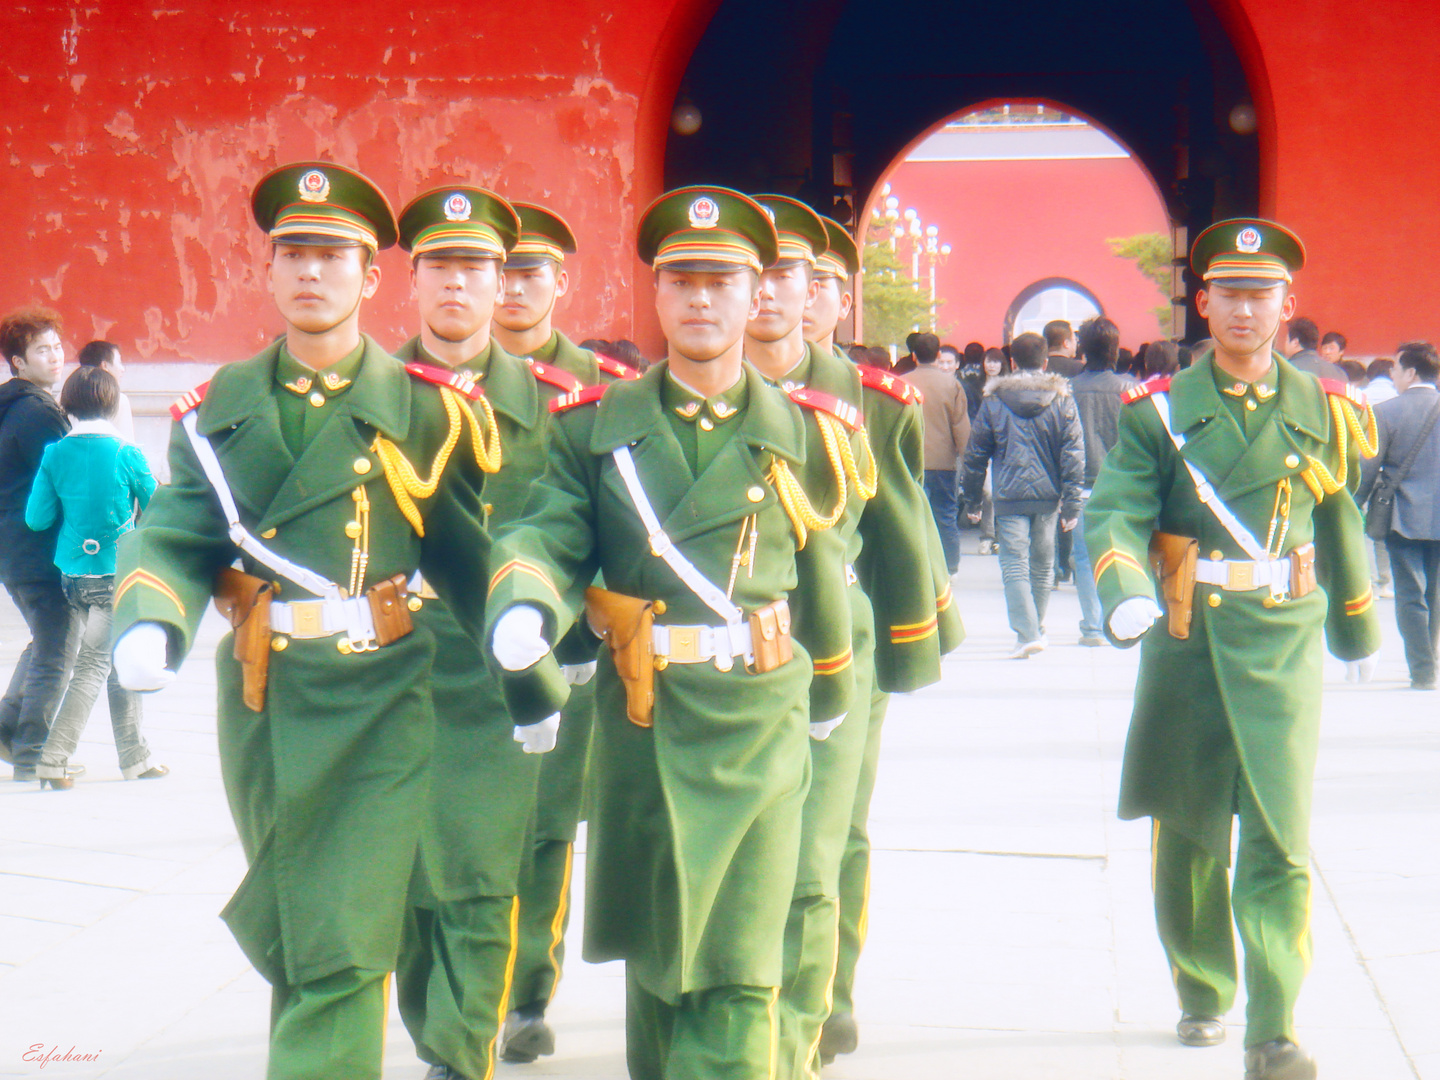 Guards of the forbidden city